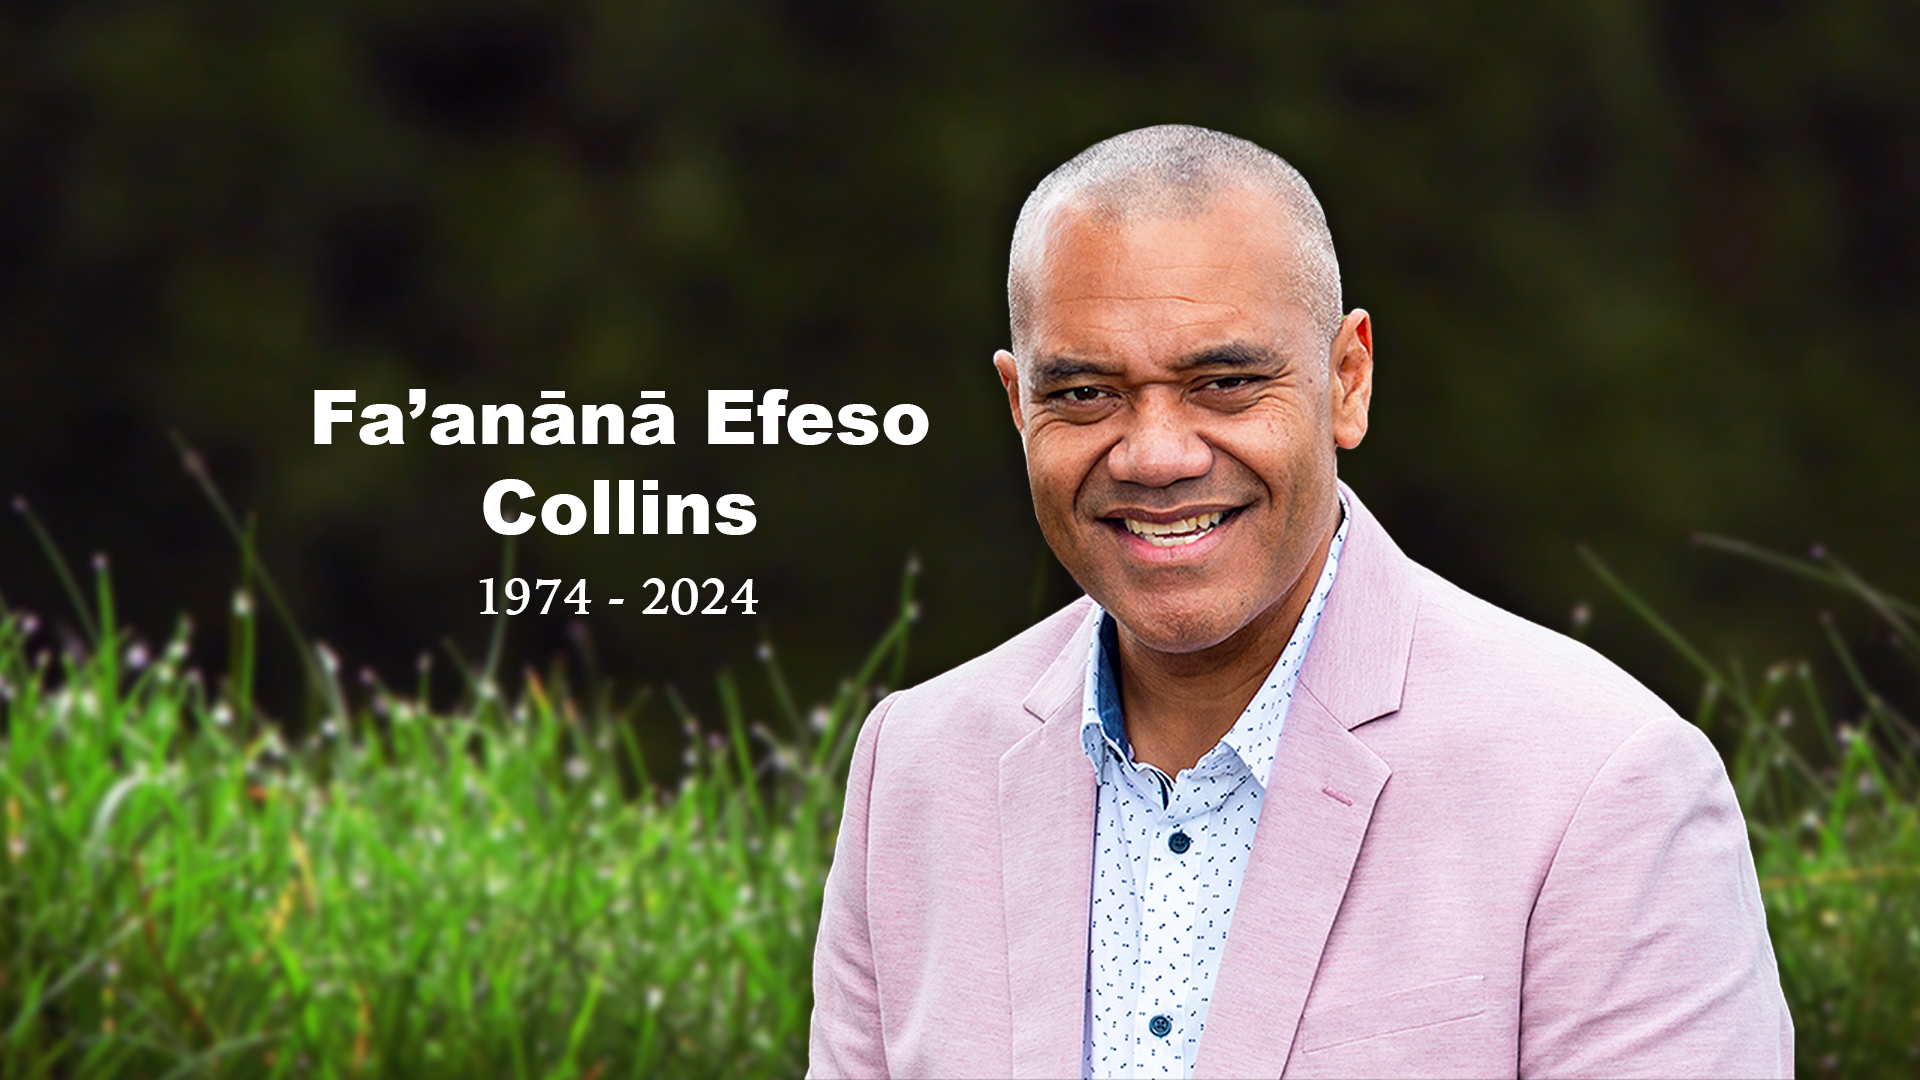 Prime Minister leads tributes for Fa’anānā Efeso Collins 